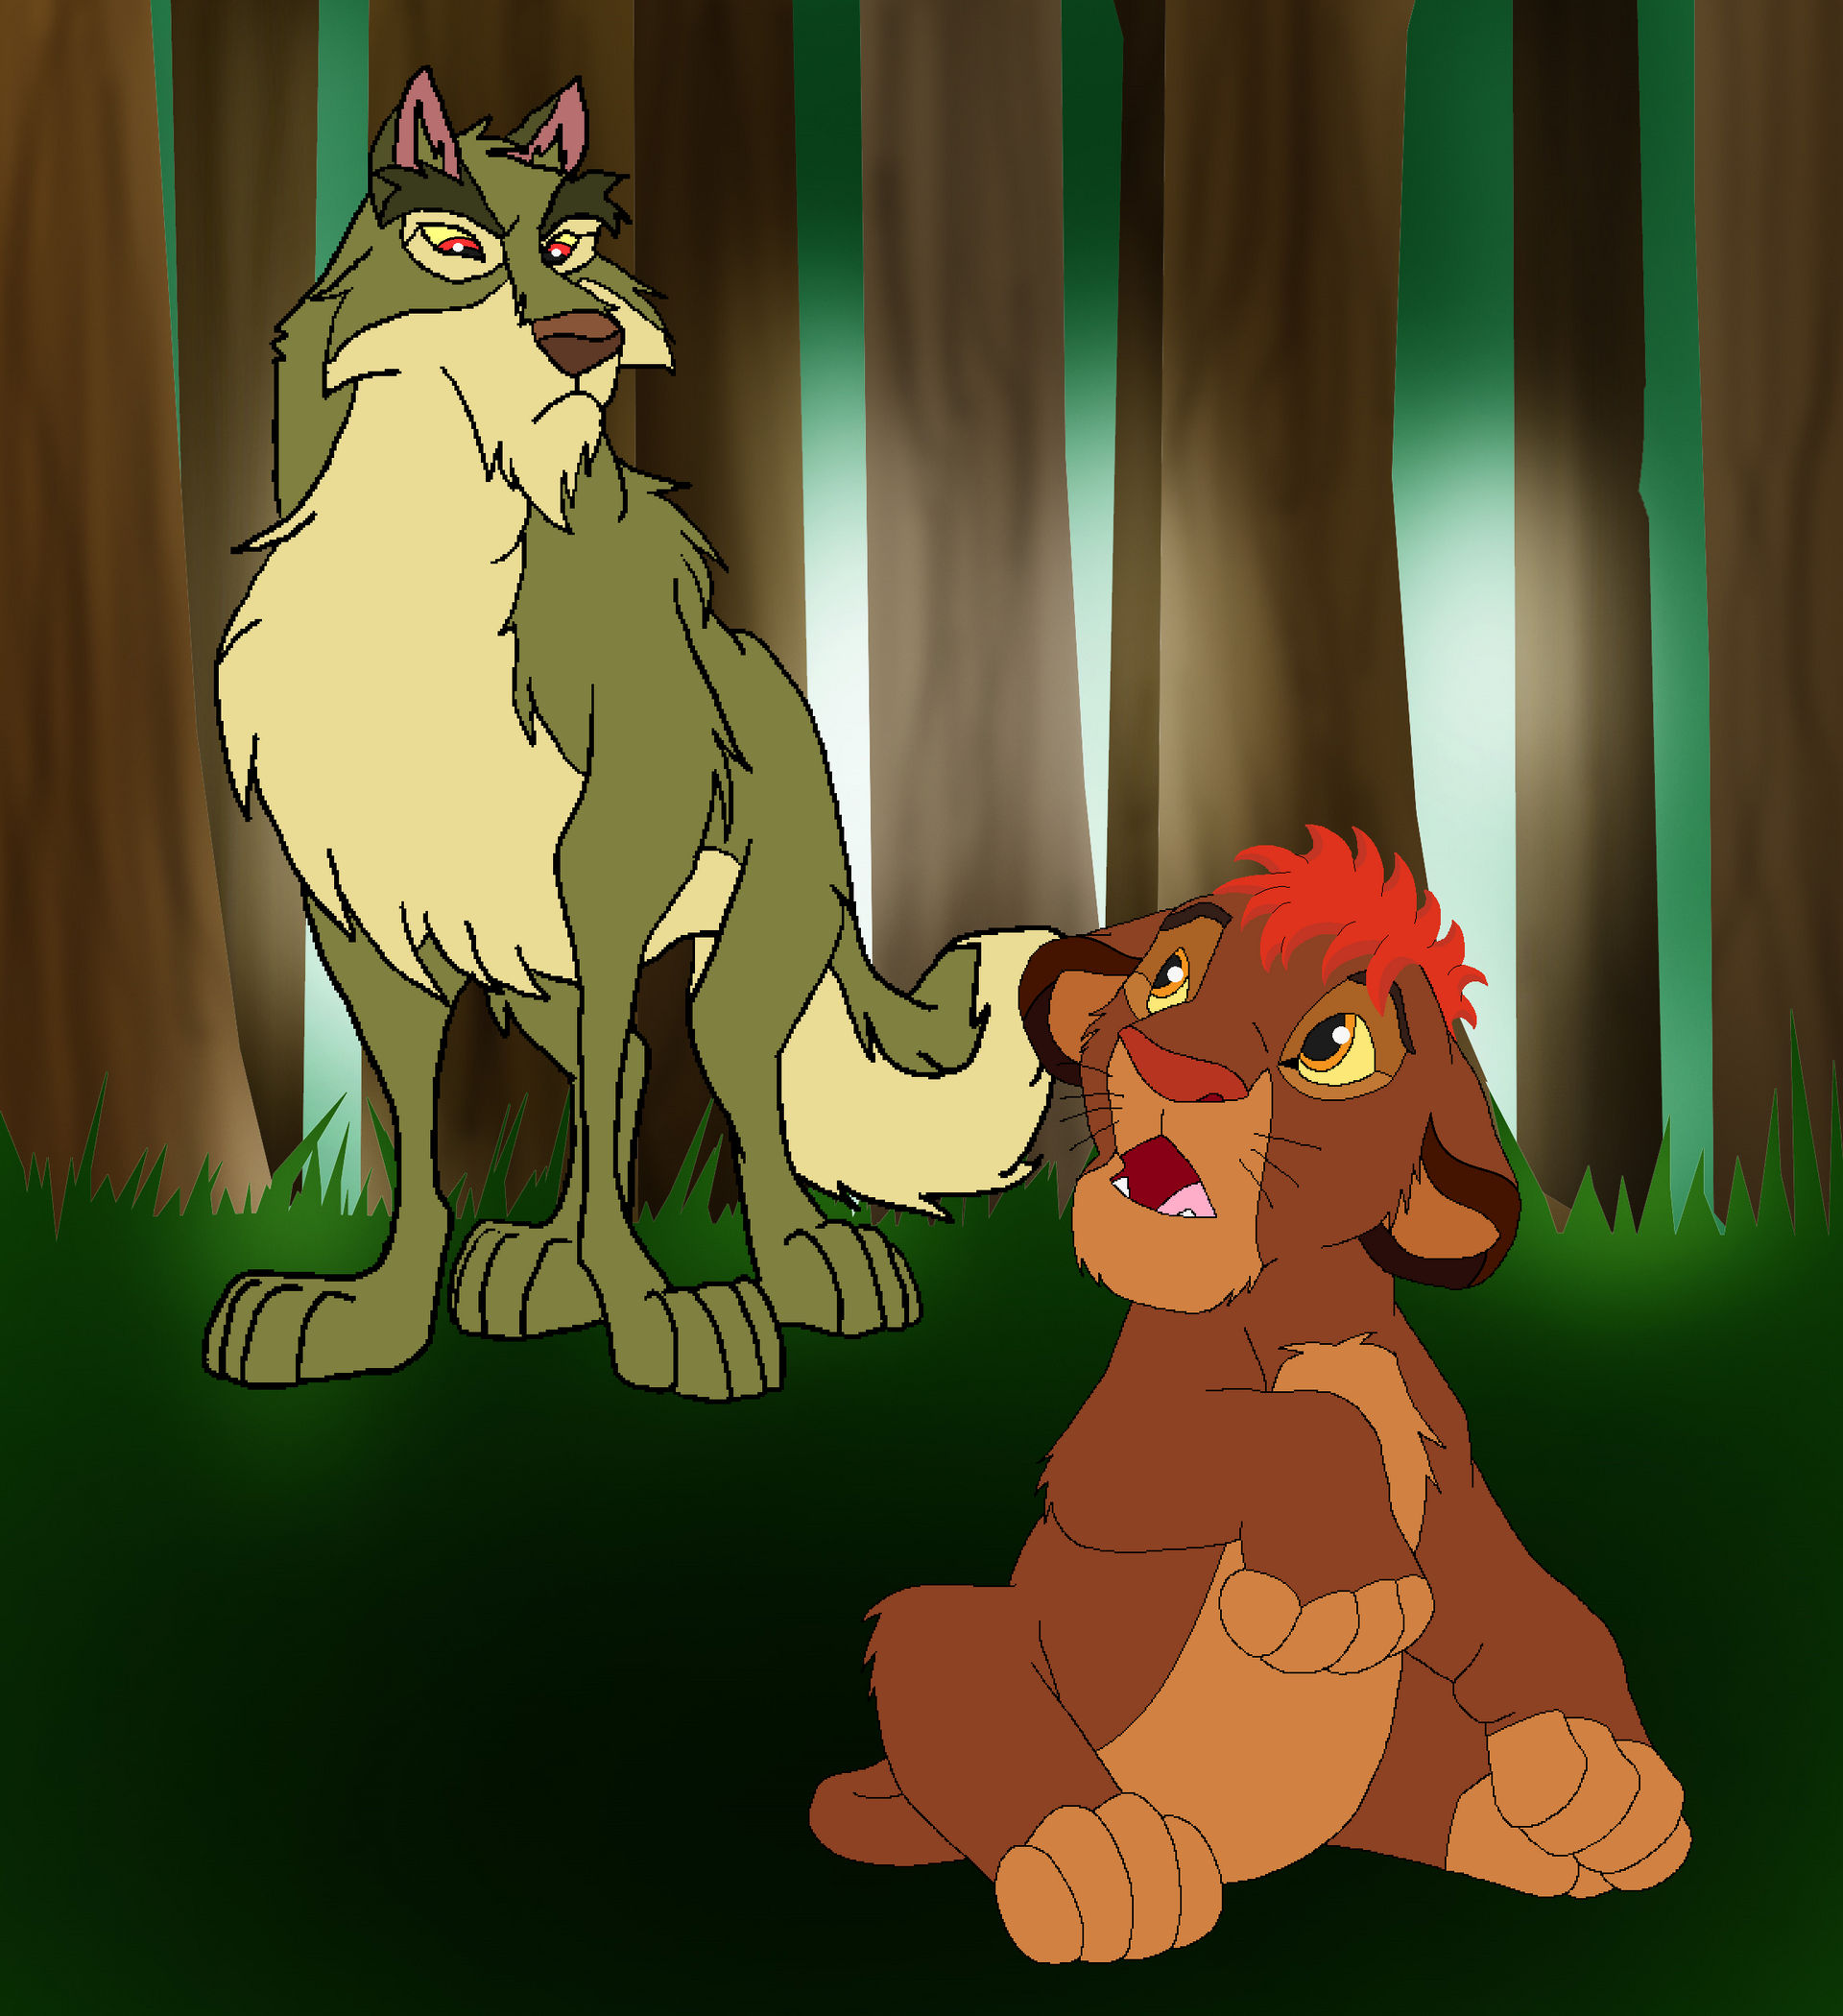 Raja meets a Wolf by Through-the-movies on DeviantArt